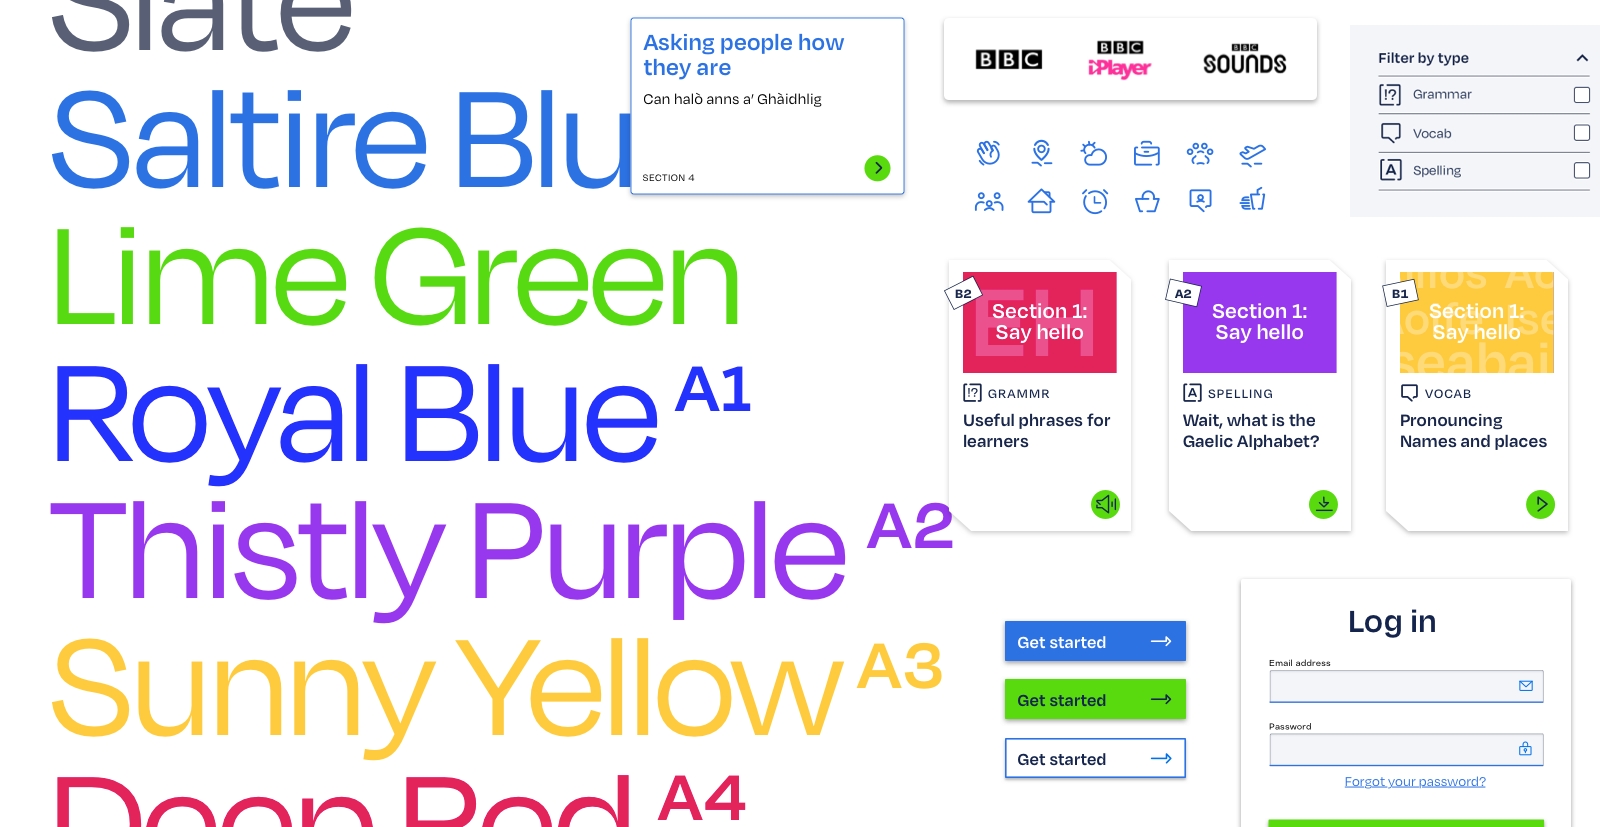 A montage of SpeakGaelic branding elements which include website elements and the colours used in the brand guidelines and how they work with BBC brands logos, which are also featured.